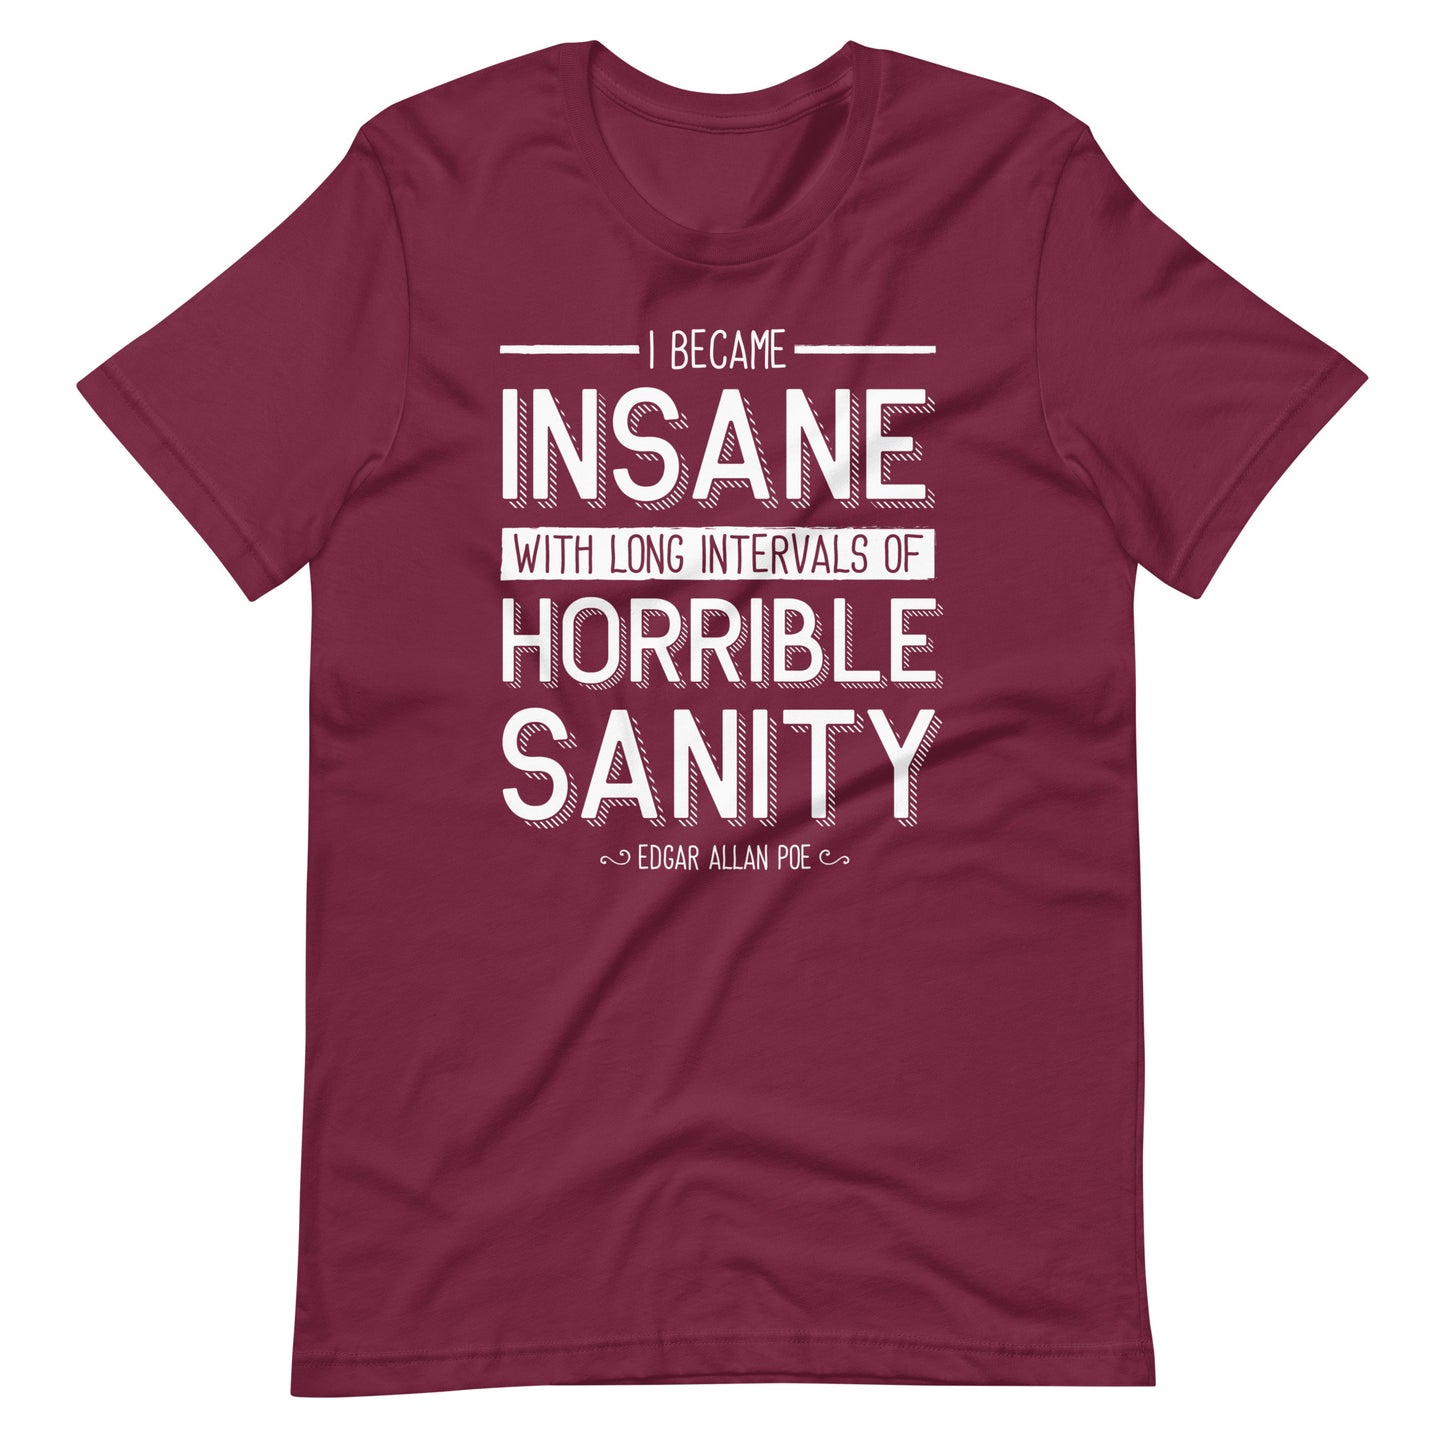 I Became Insane Edgar Allan Poe Quote - Men's t-shirt - Maroon Front